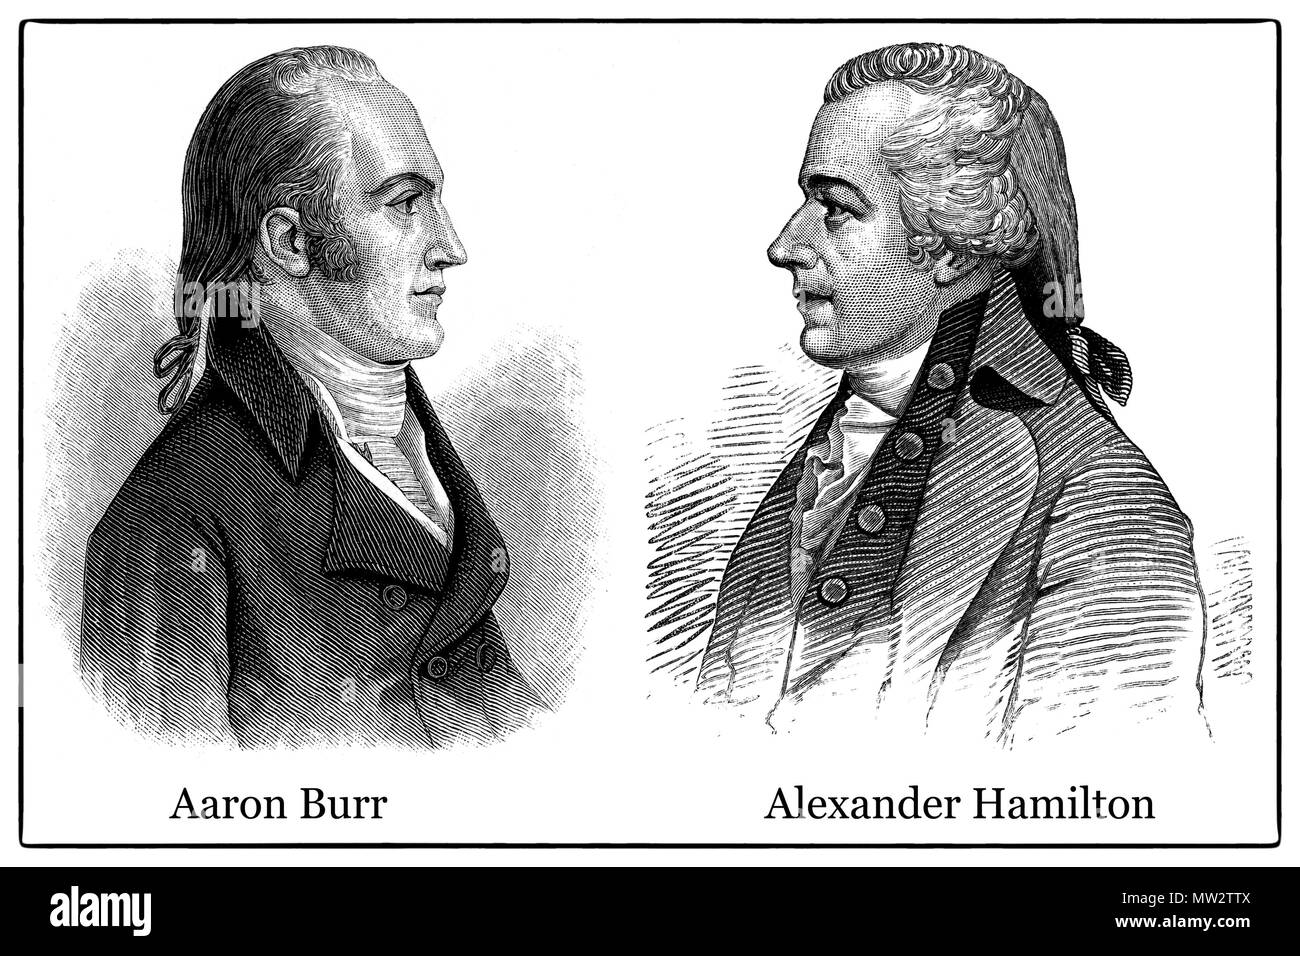 Pictured together are Aaron Burr and Alexander Hamilton who fought  a famous duel that led to Hamilton's death. Stock Photo